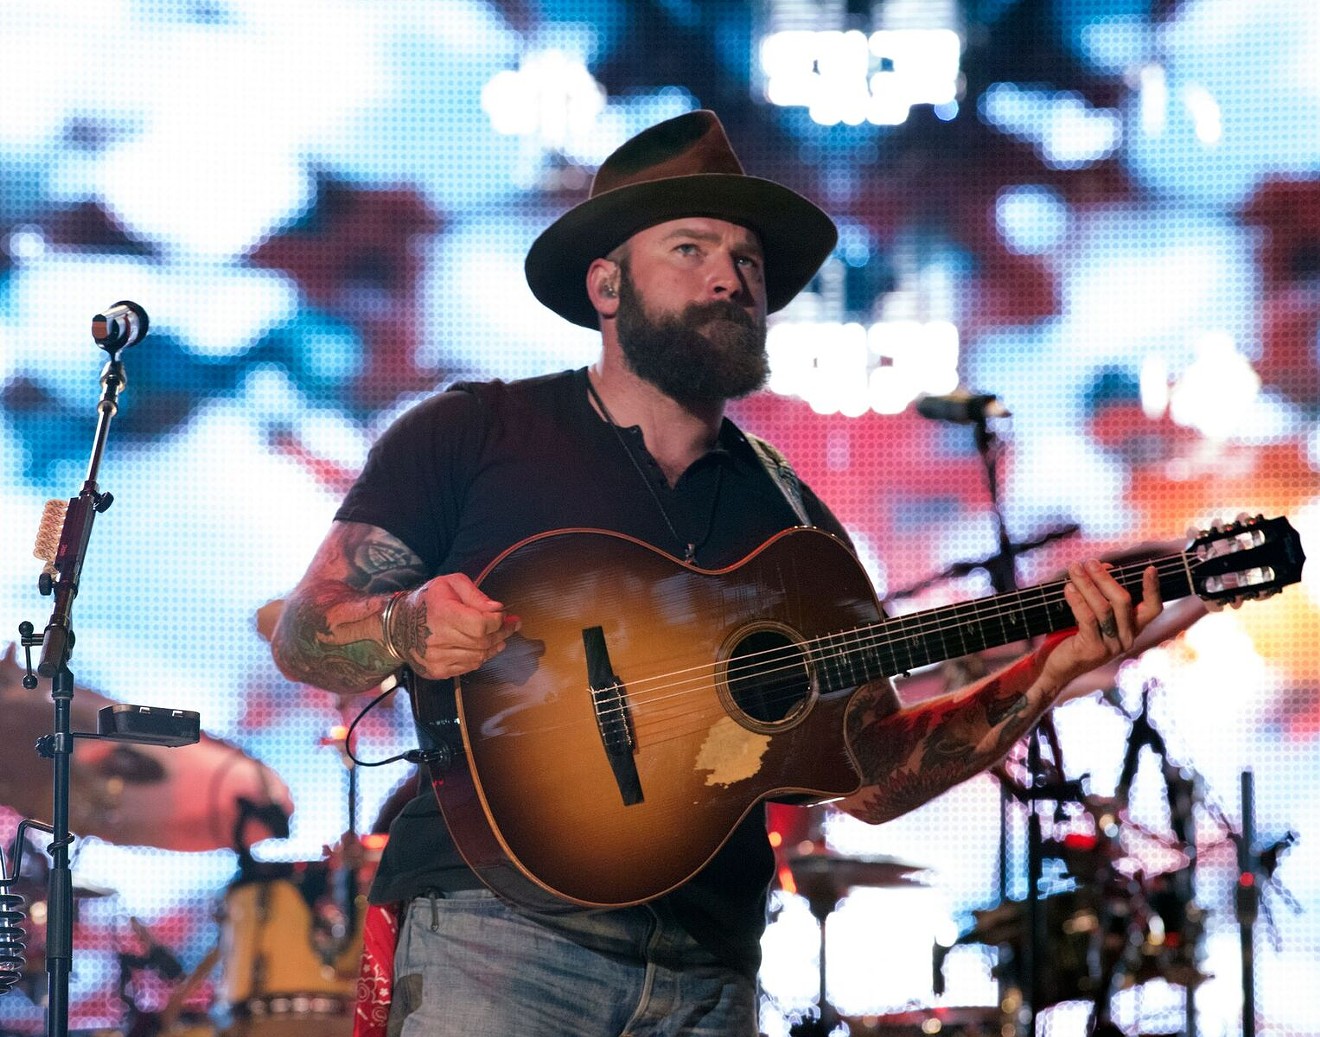 Zac Brown of the Zac Brown Band in front of some pretty lights.